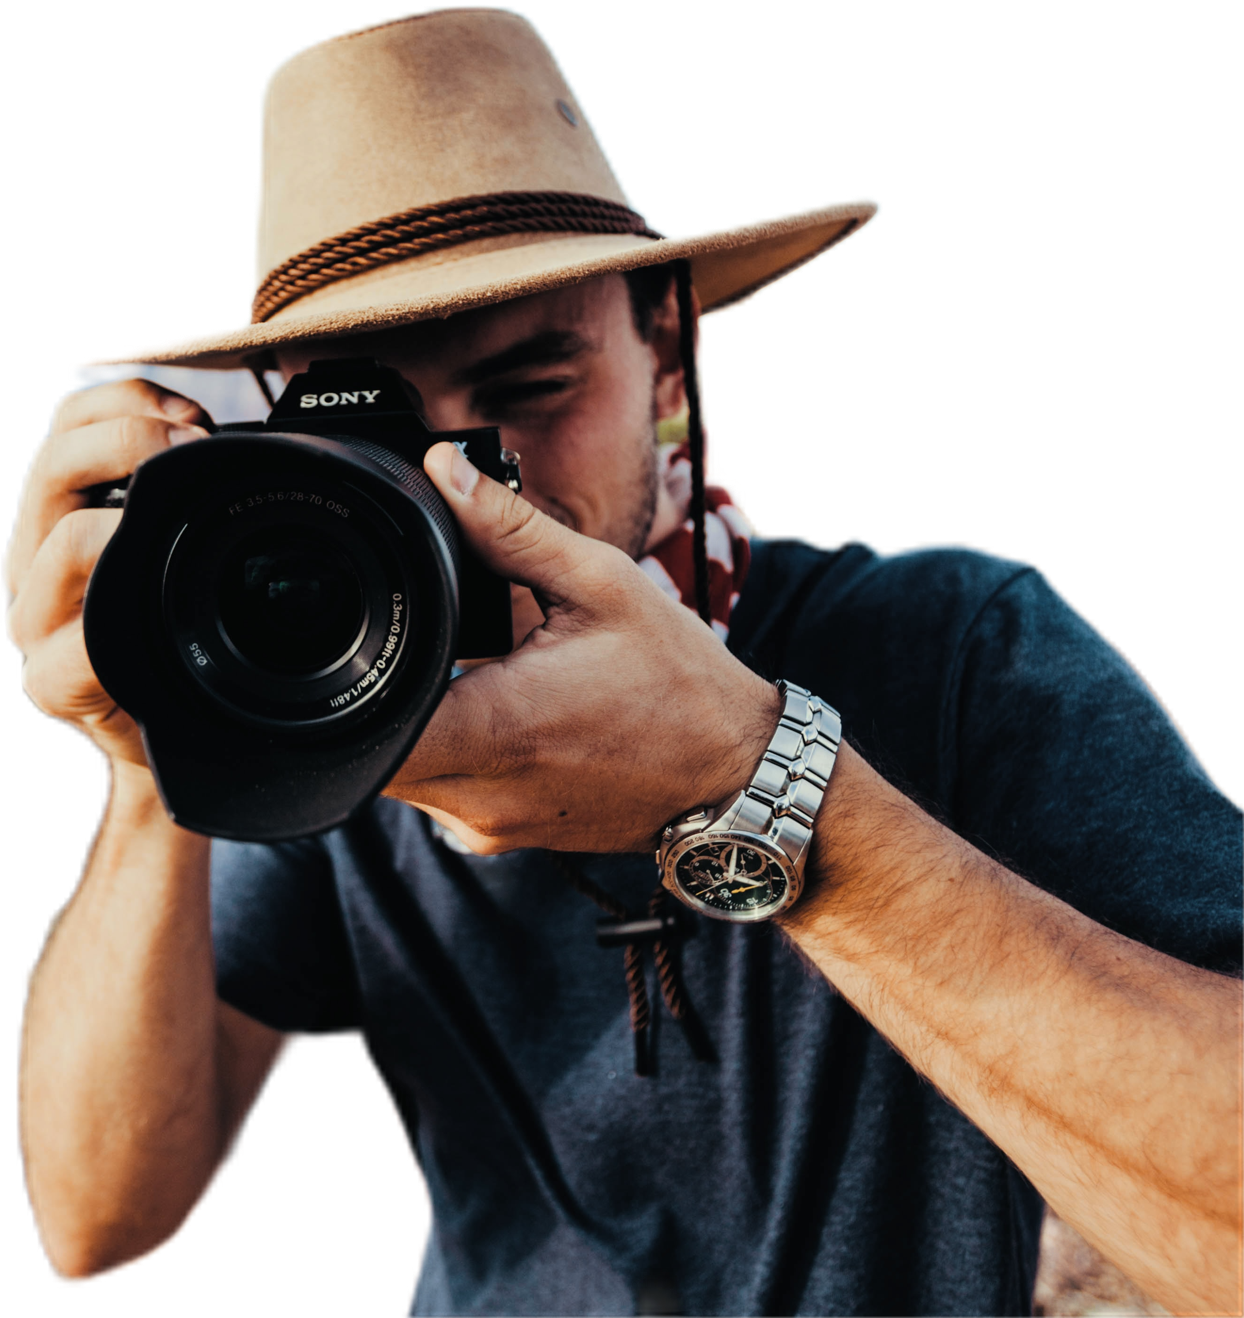 Male with a hat using a camera